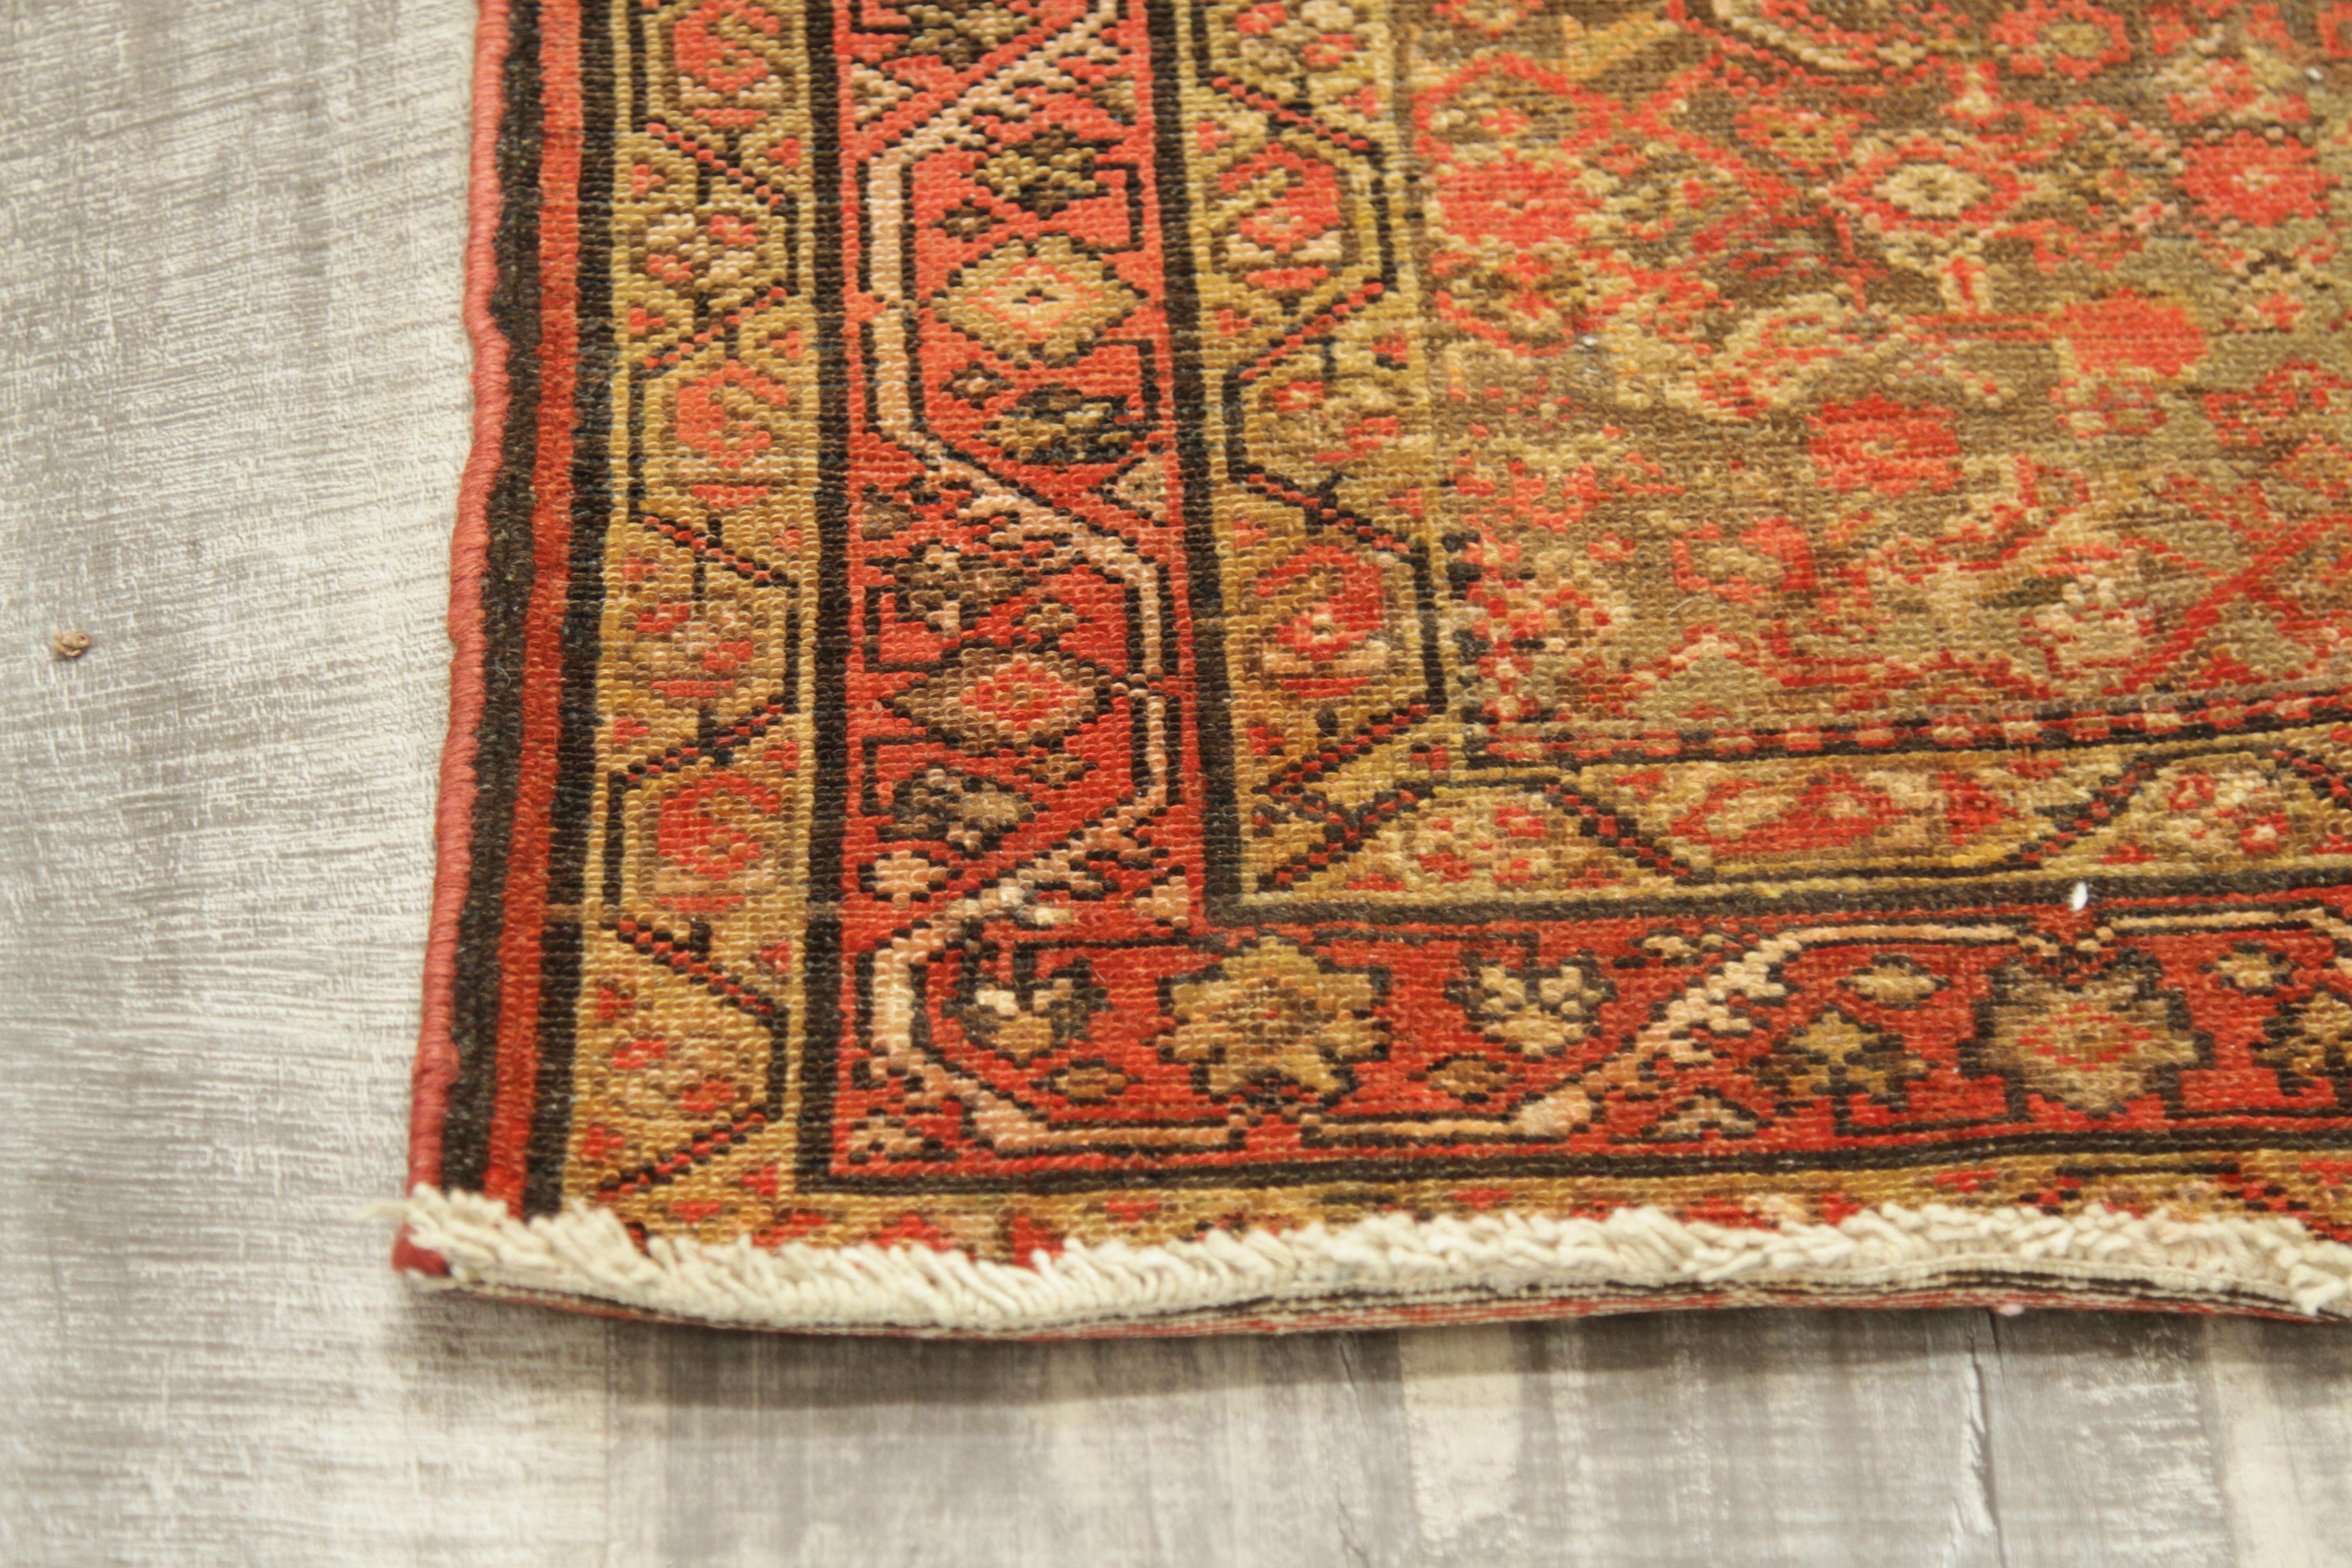 Antique Persian Rug in Malayer Design, 1910 For Sale 1